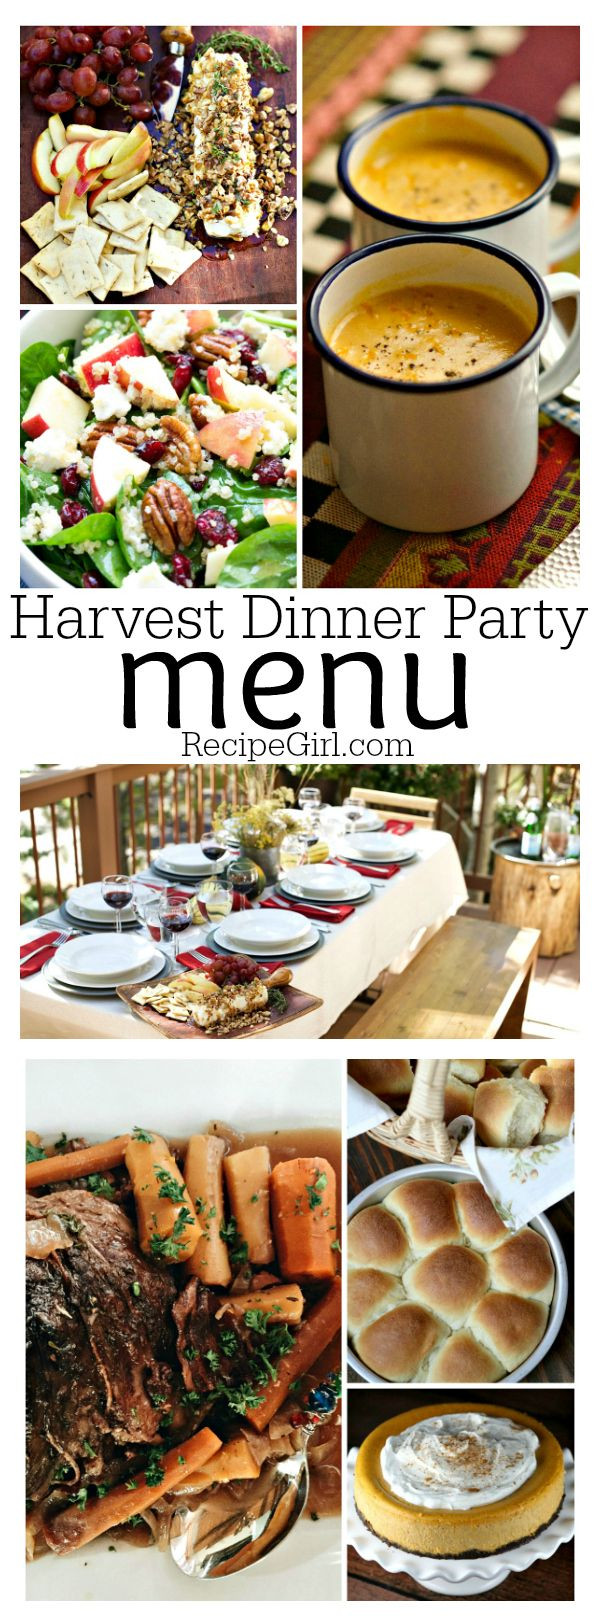 Fall Dinner Party Menu
 Harvest Dinner Party Menu plete menu with recipes and